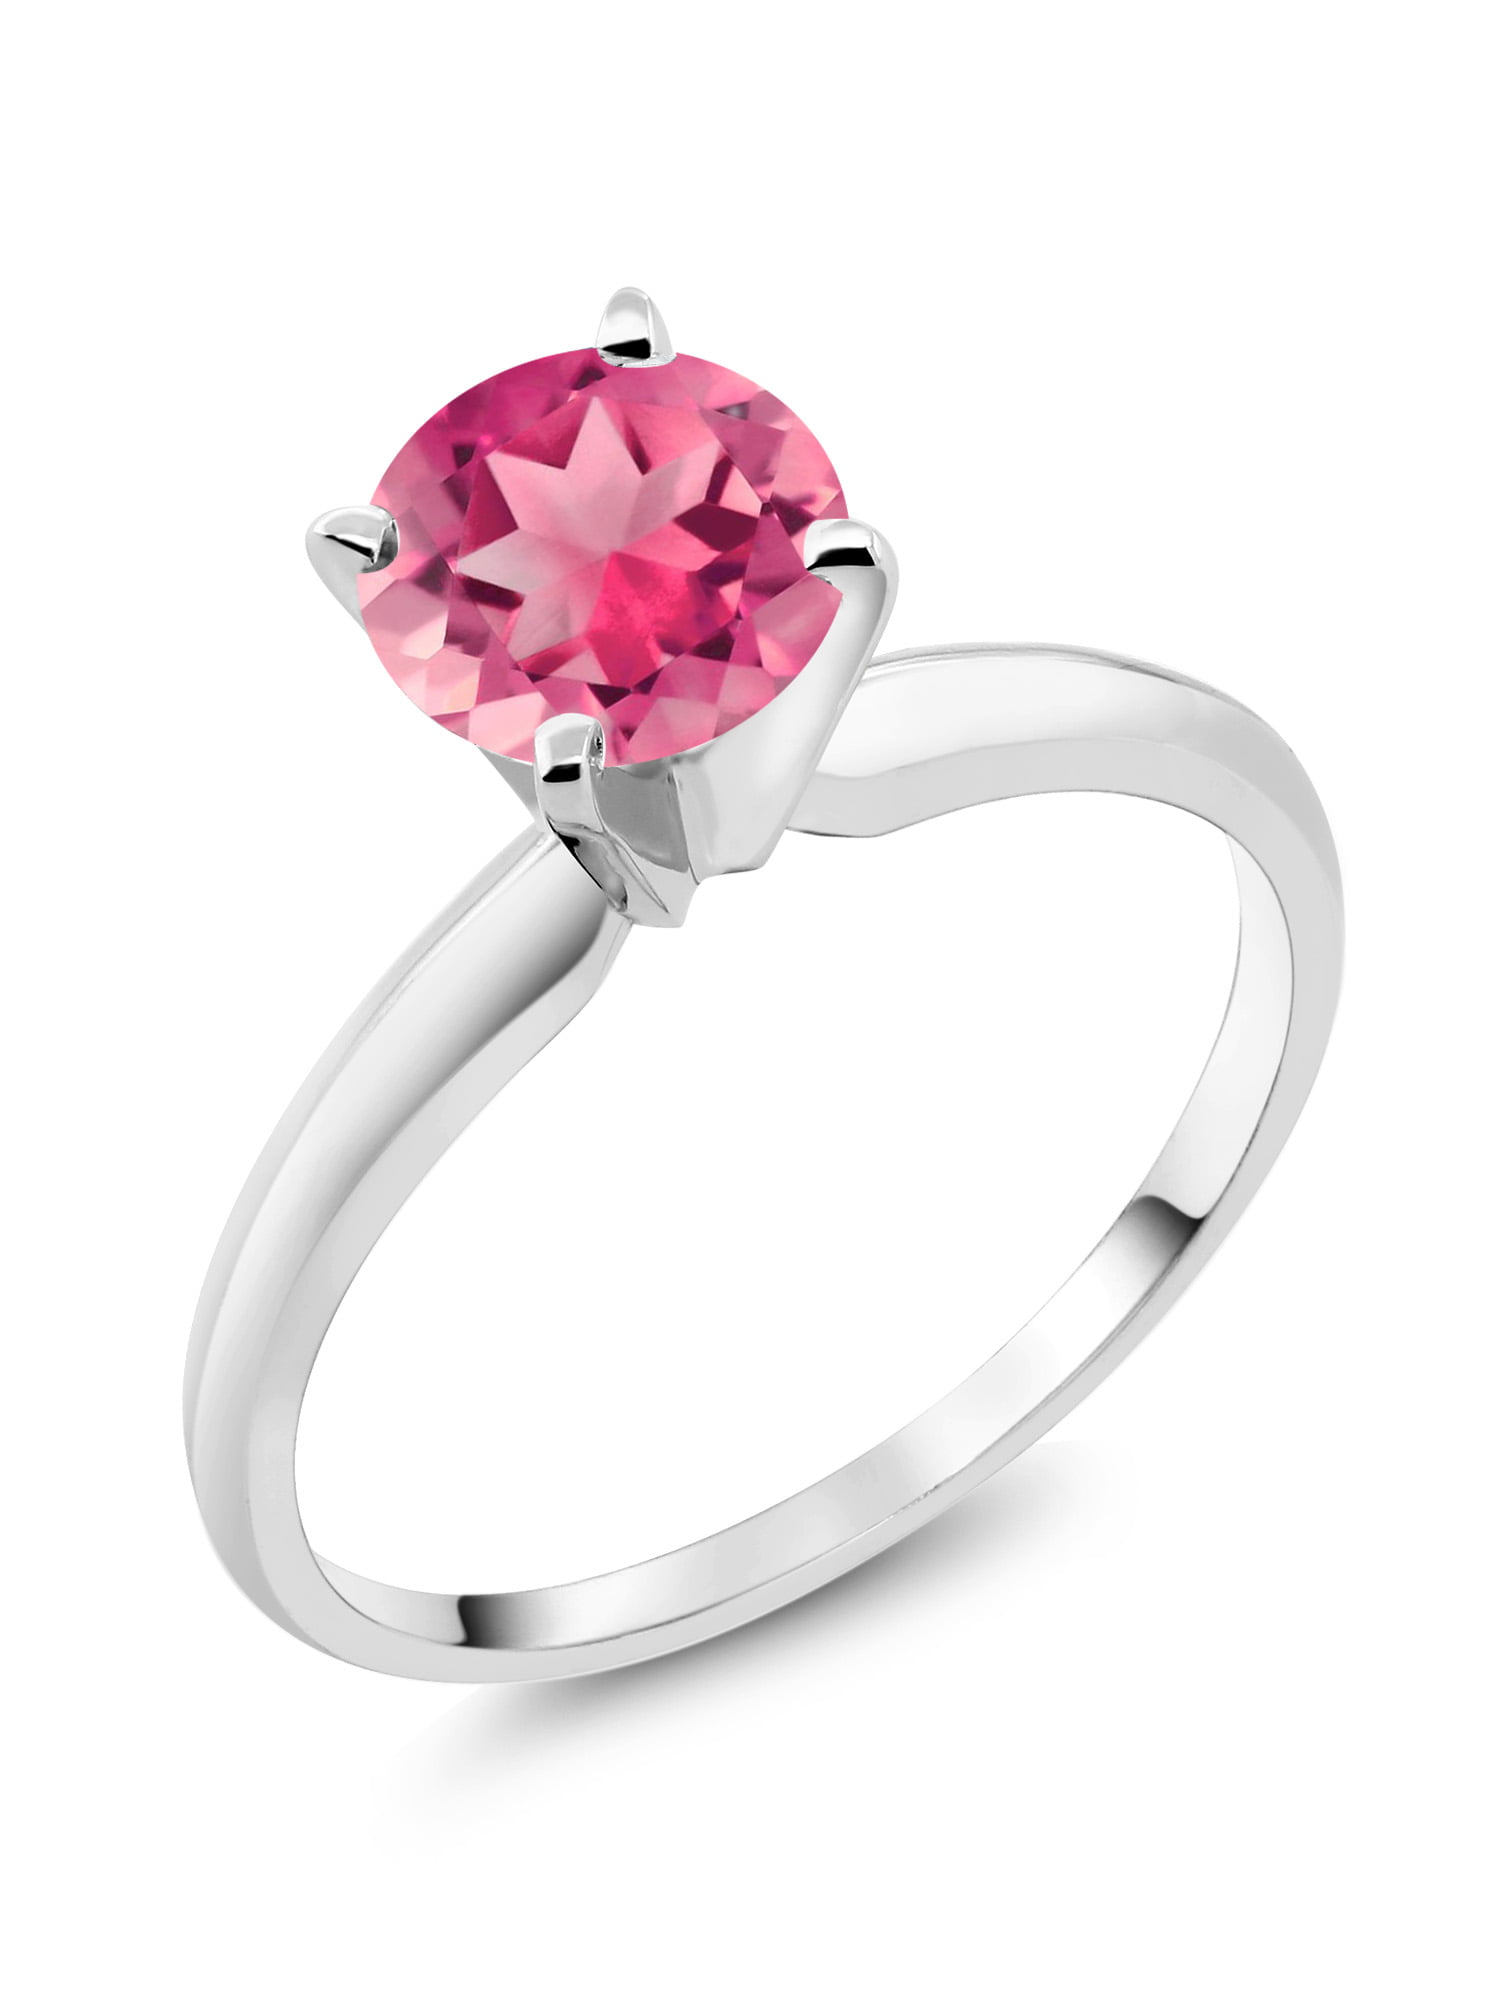 Gem Stone King 925 Sterling Silver 1.50 Ct Round Pink Mystic Topaz Womens Halo Engagement Ring 